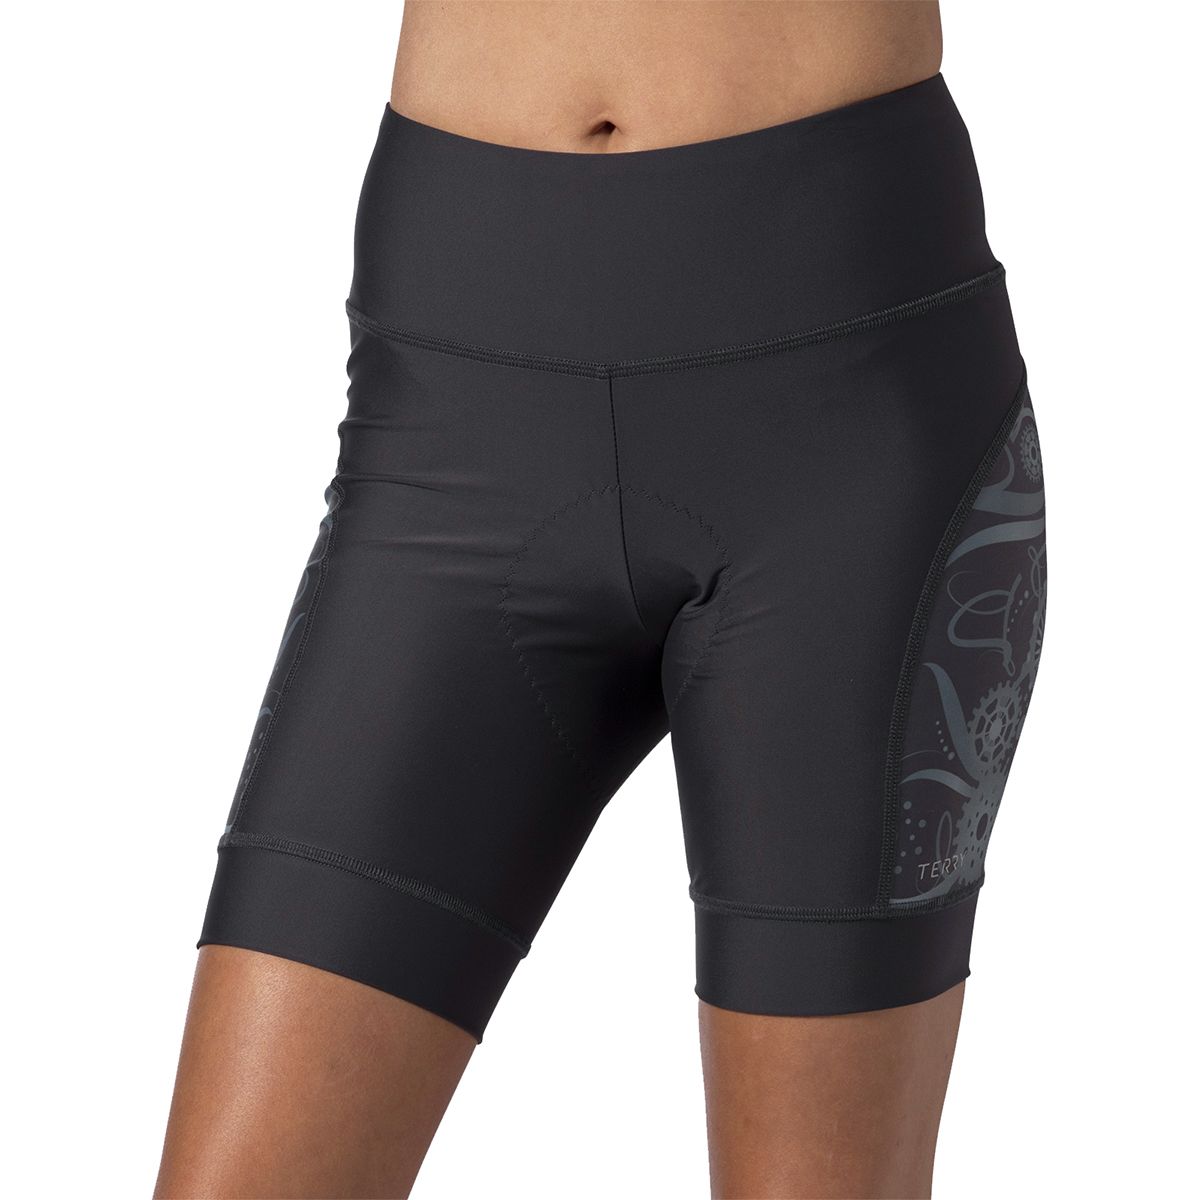 Terry Bicycles Soleil Short - Women's